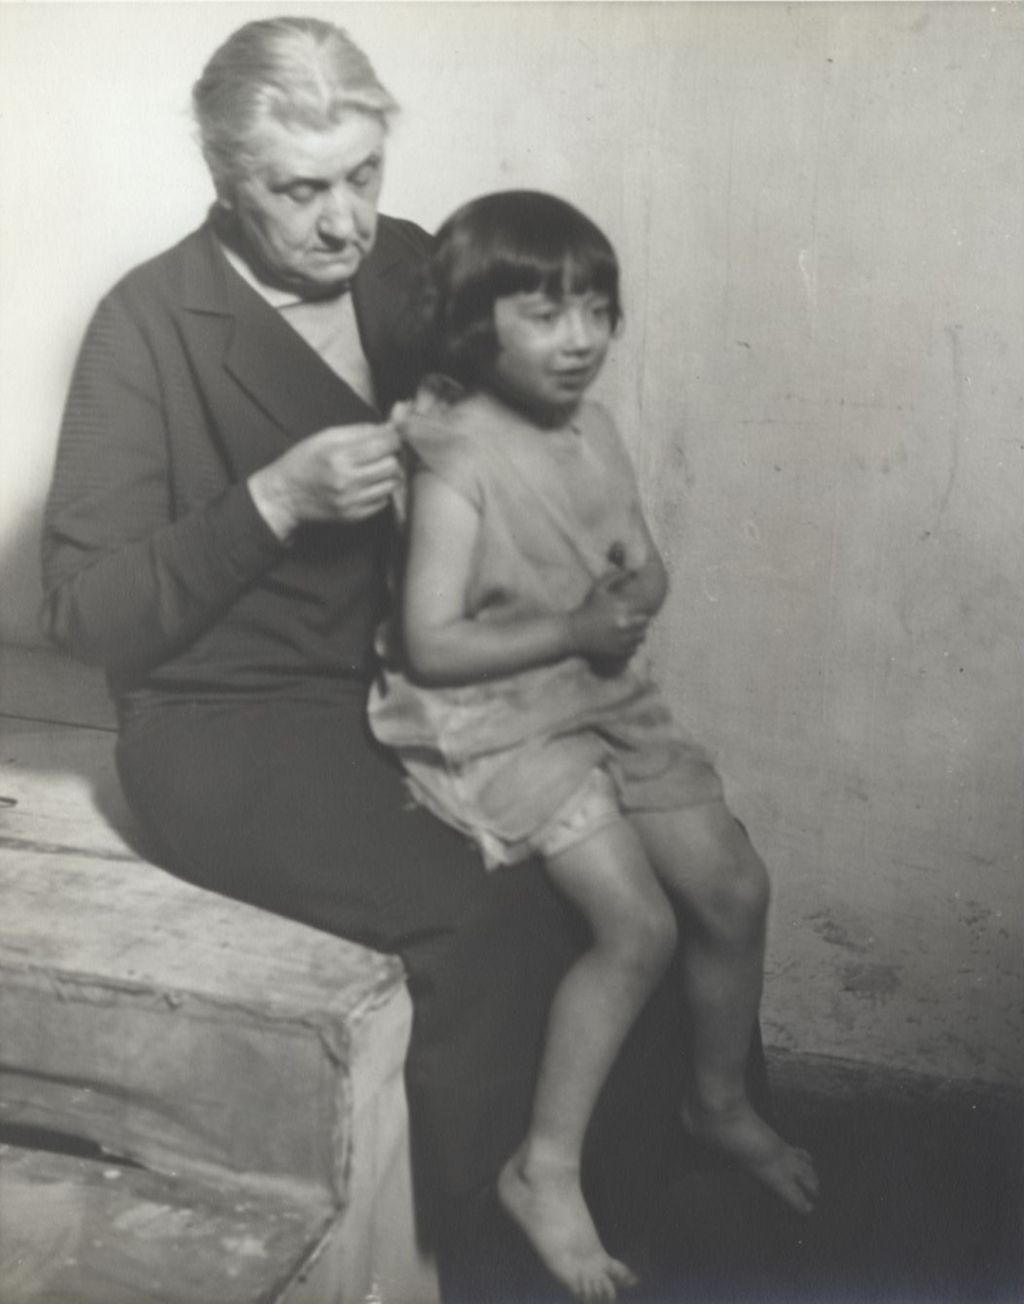 Jane Addams with Theater Child Seated on Her Lap